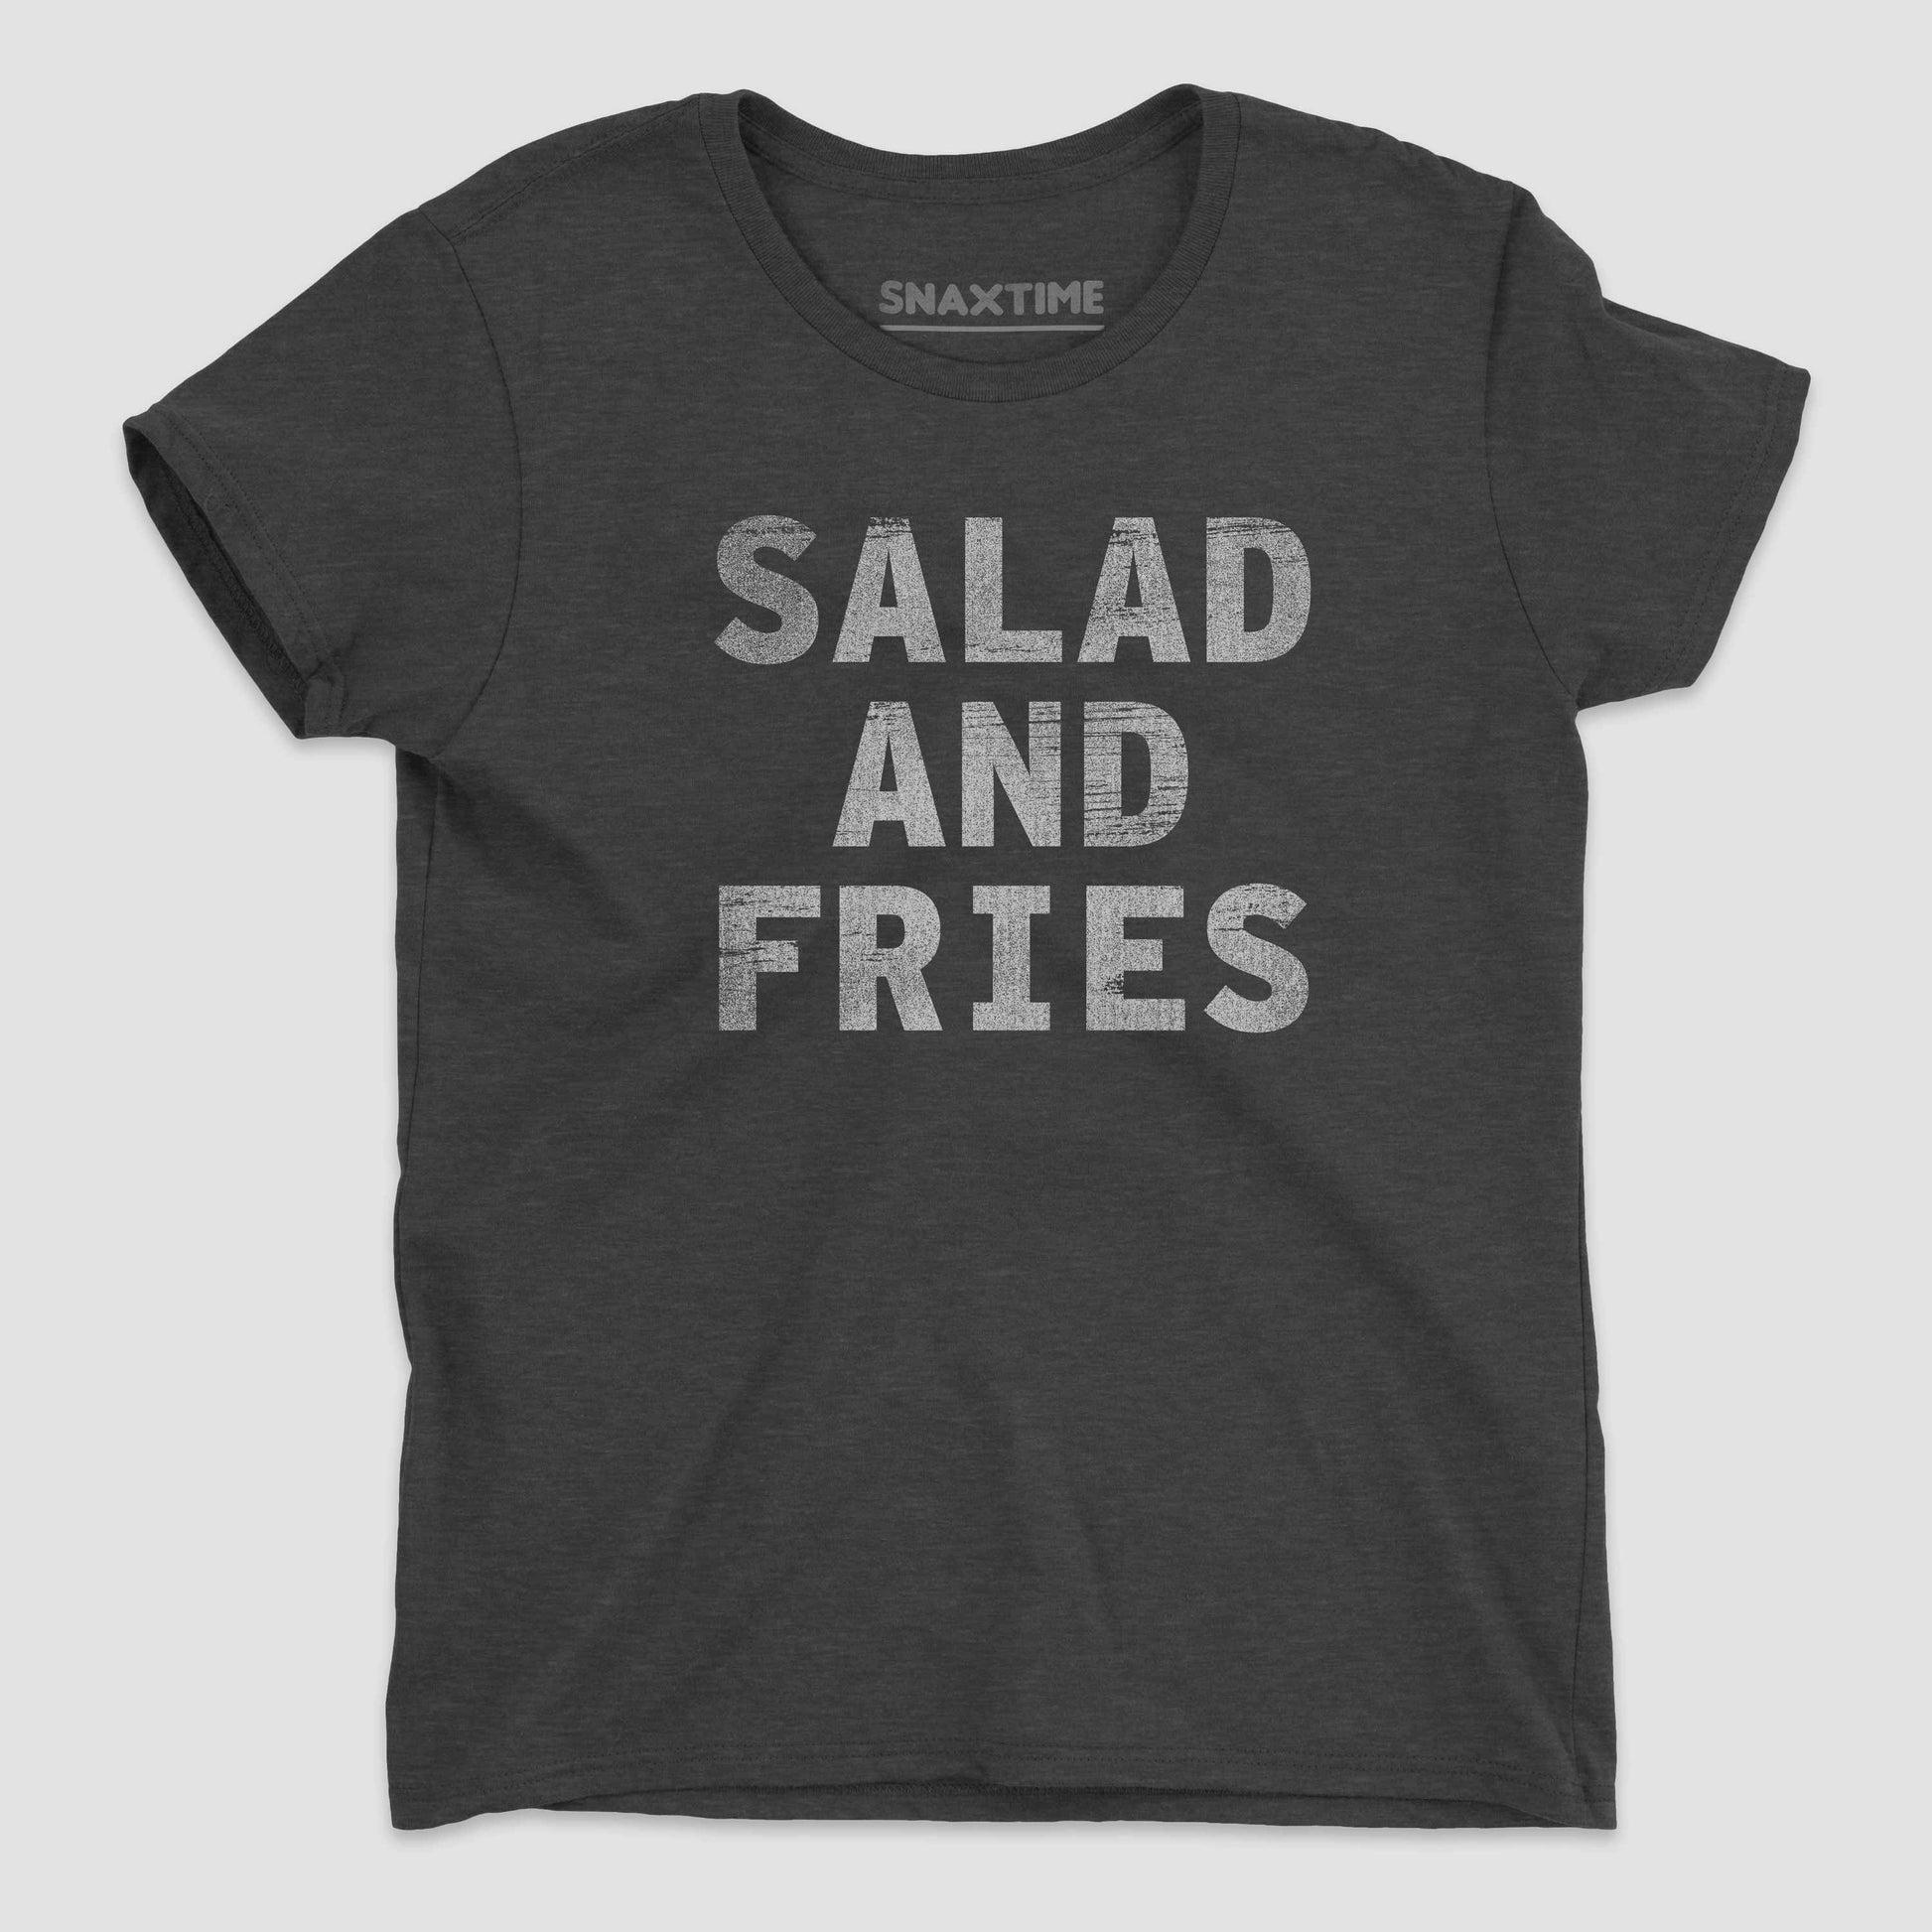 Heather Dark Grey Salad and Fries Women's Graphic T-Shirt by Snaxtime